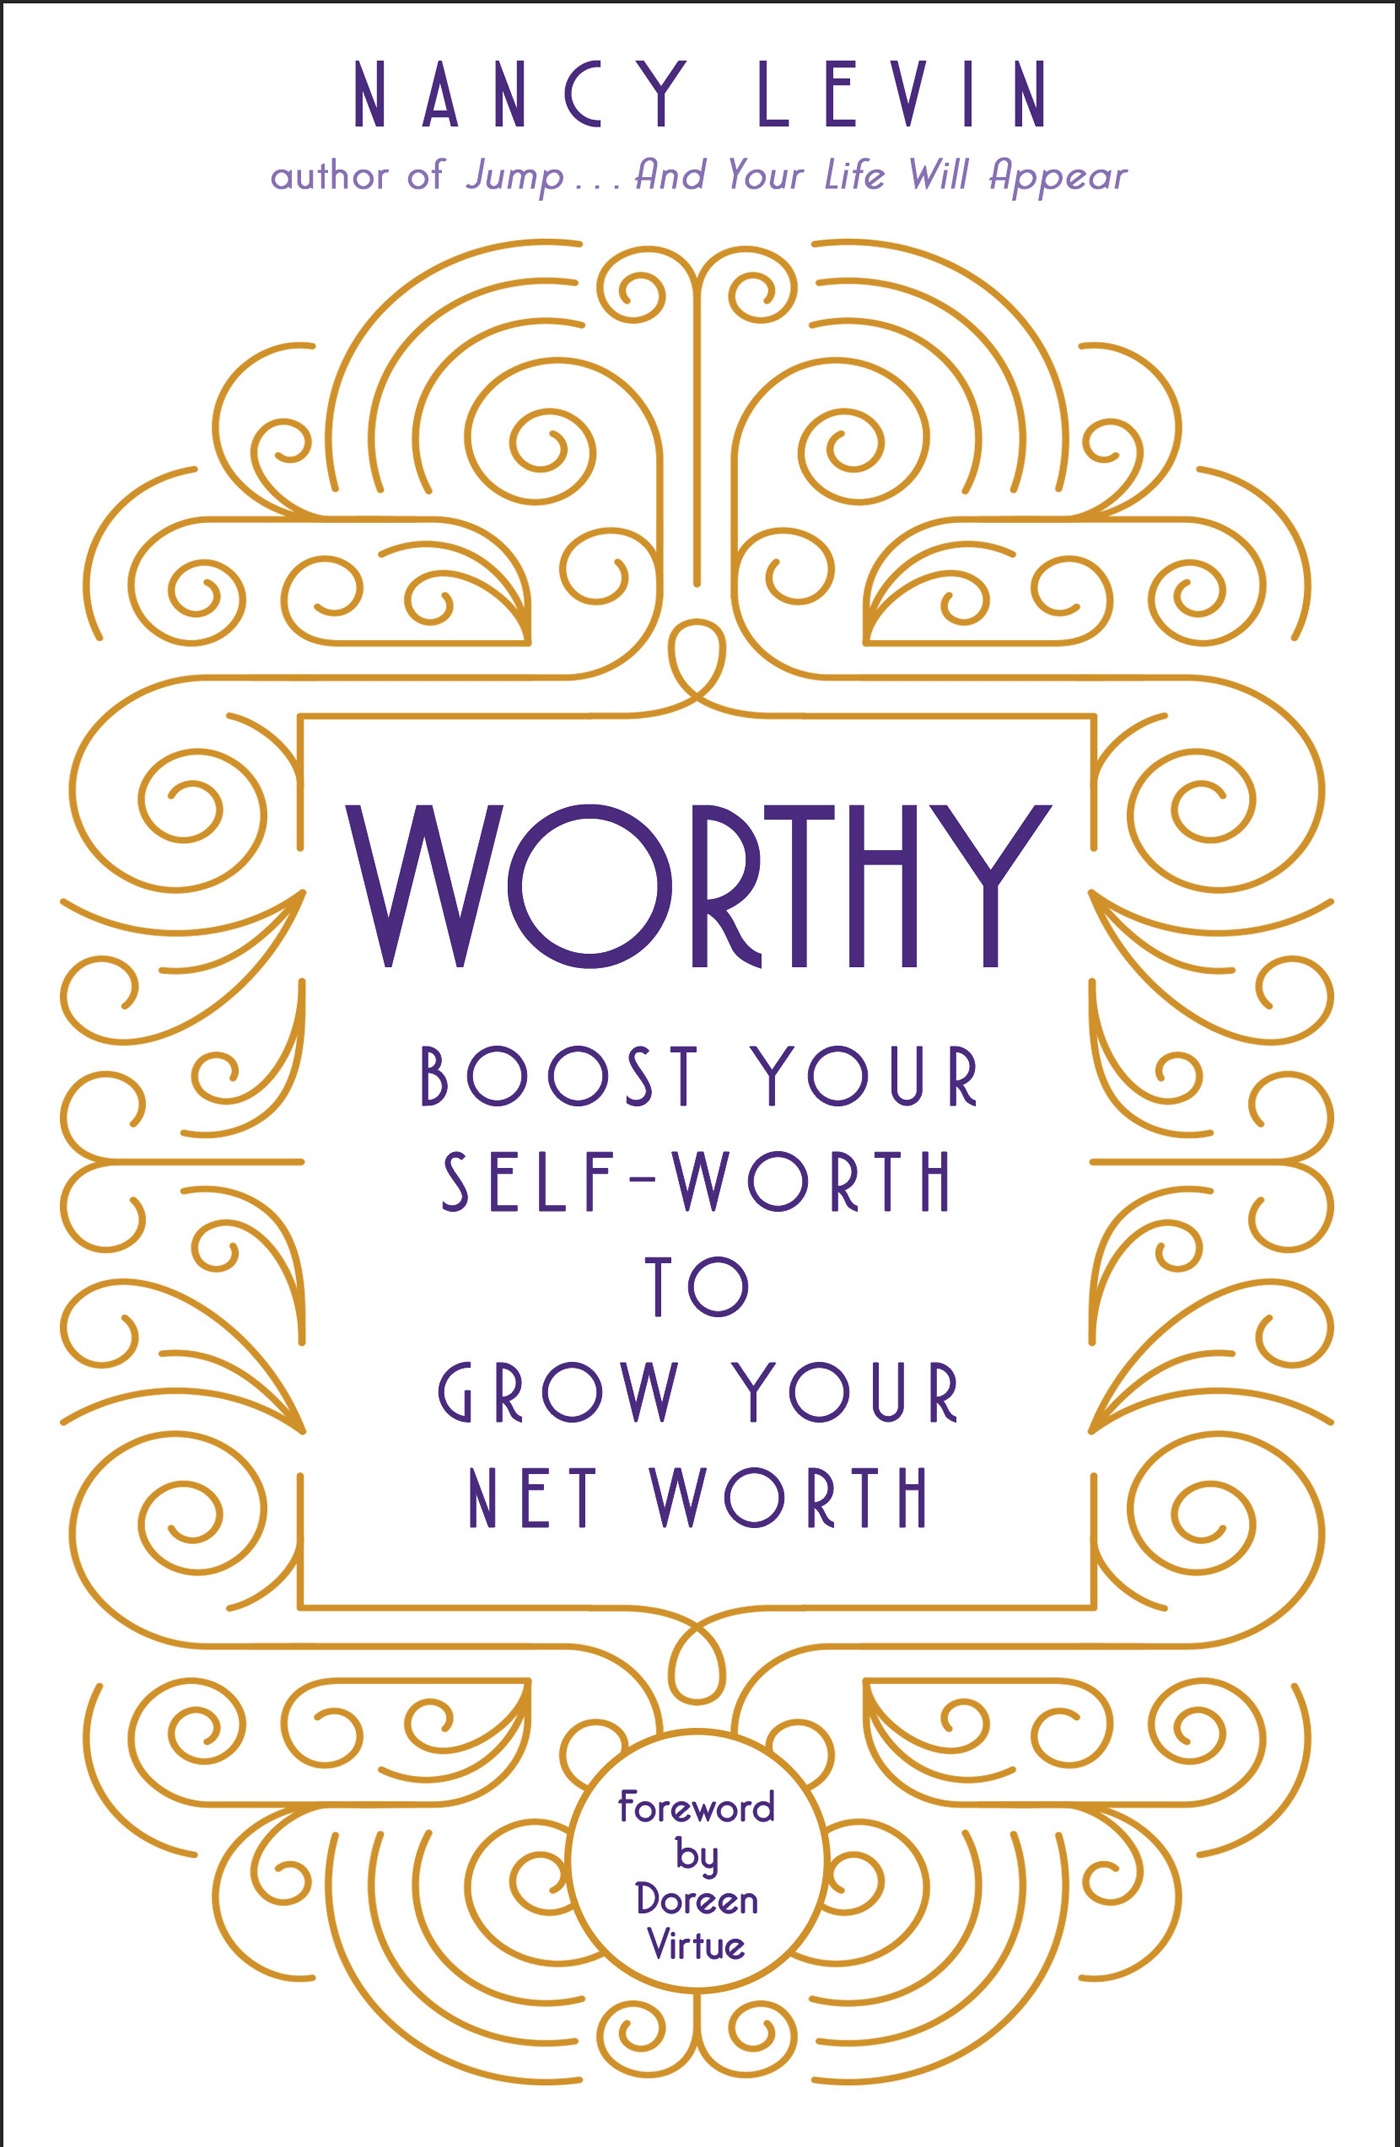 Worthy: Boost Your Self-Worth to Grow Your Net Worth